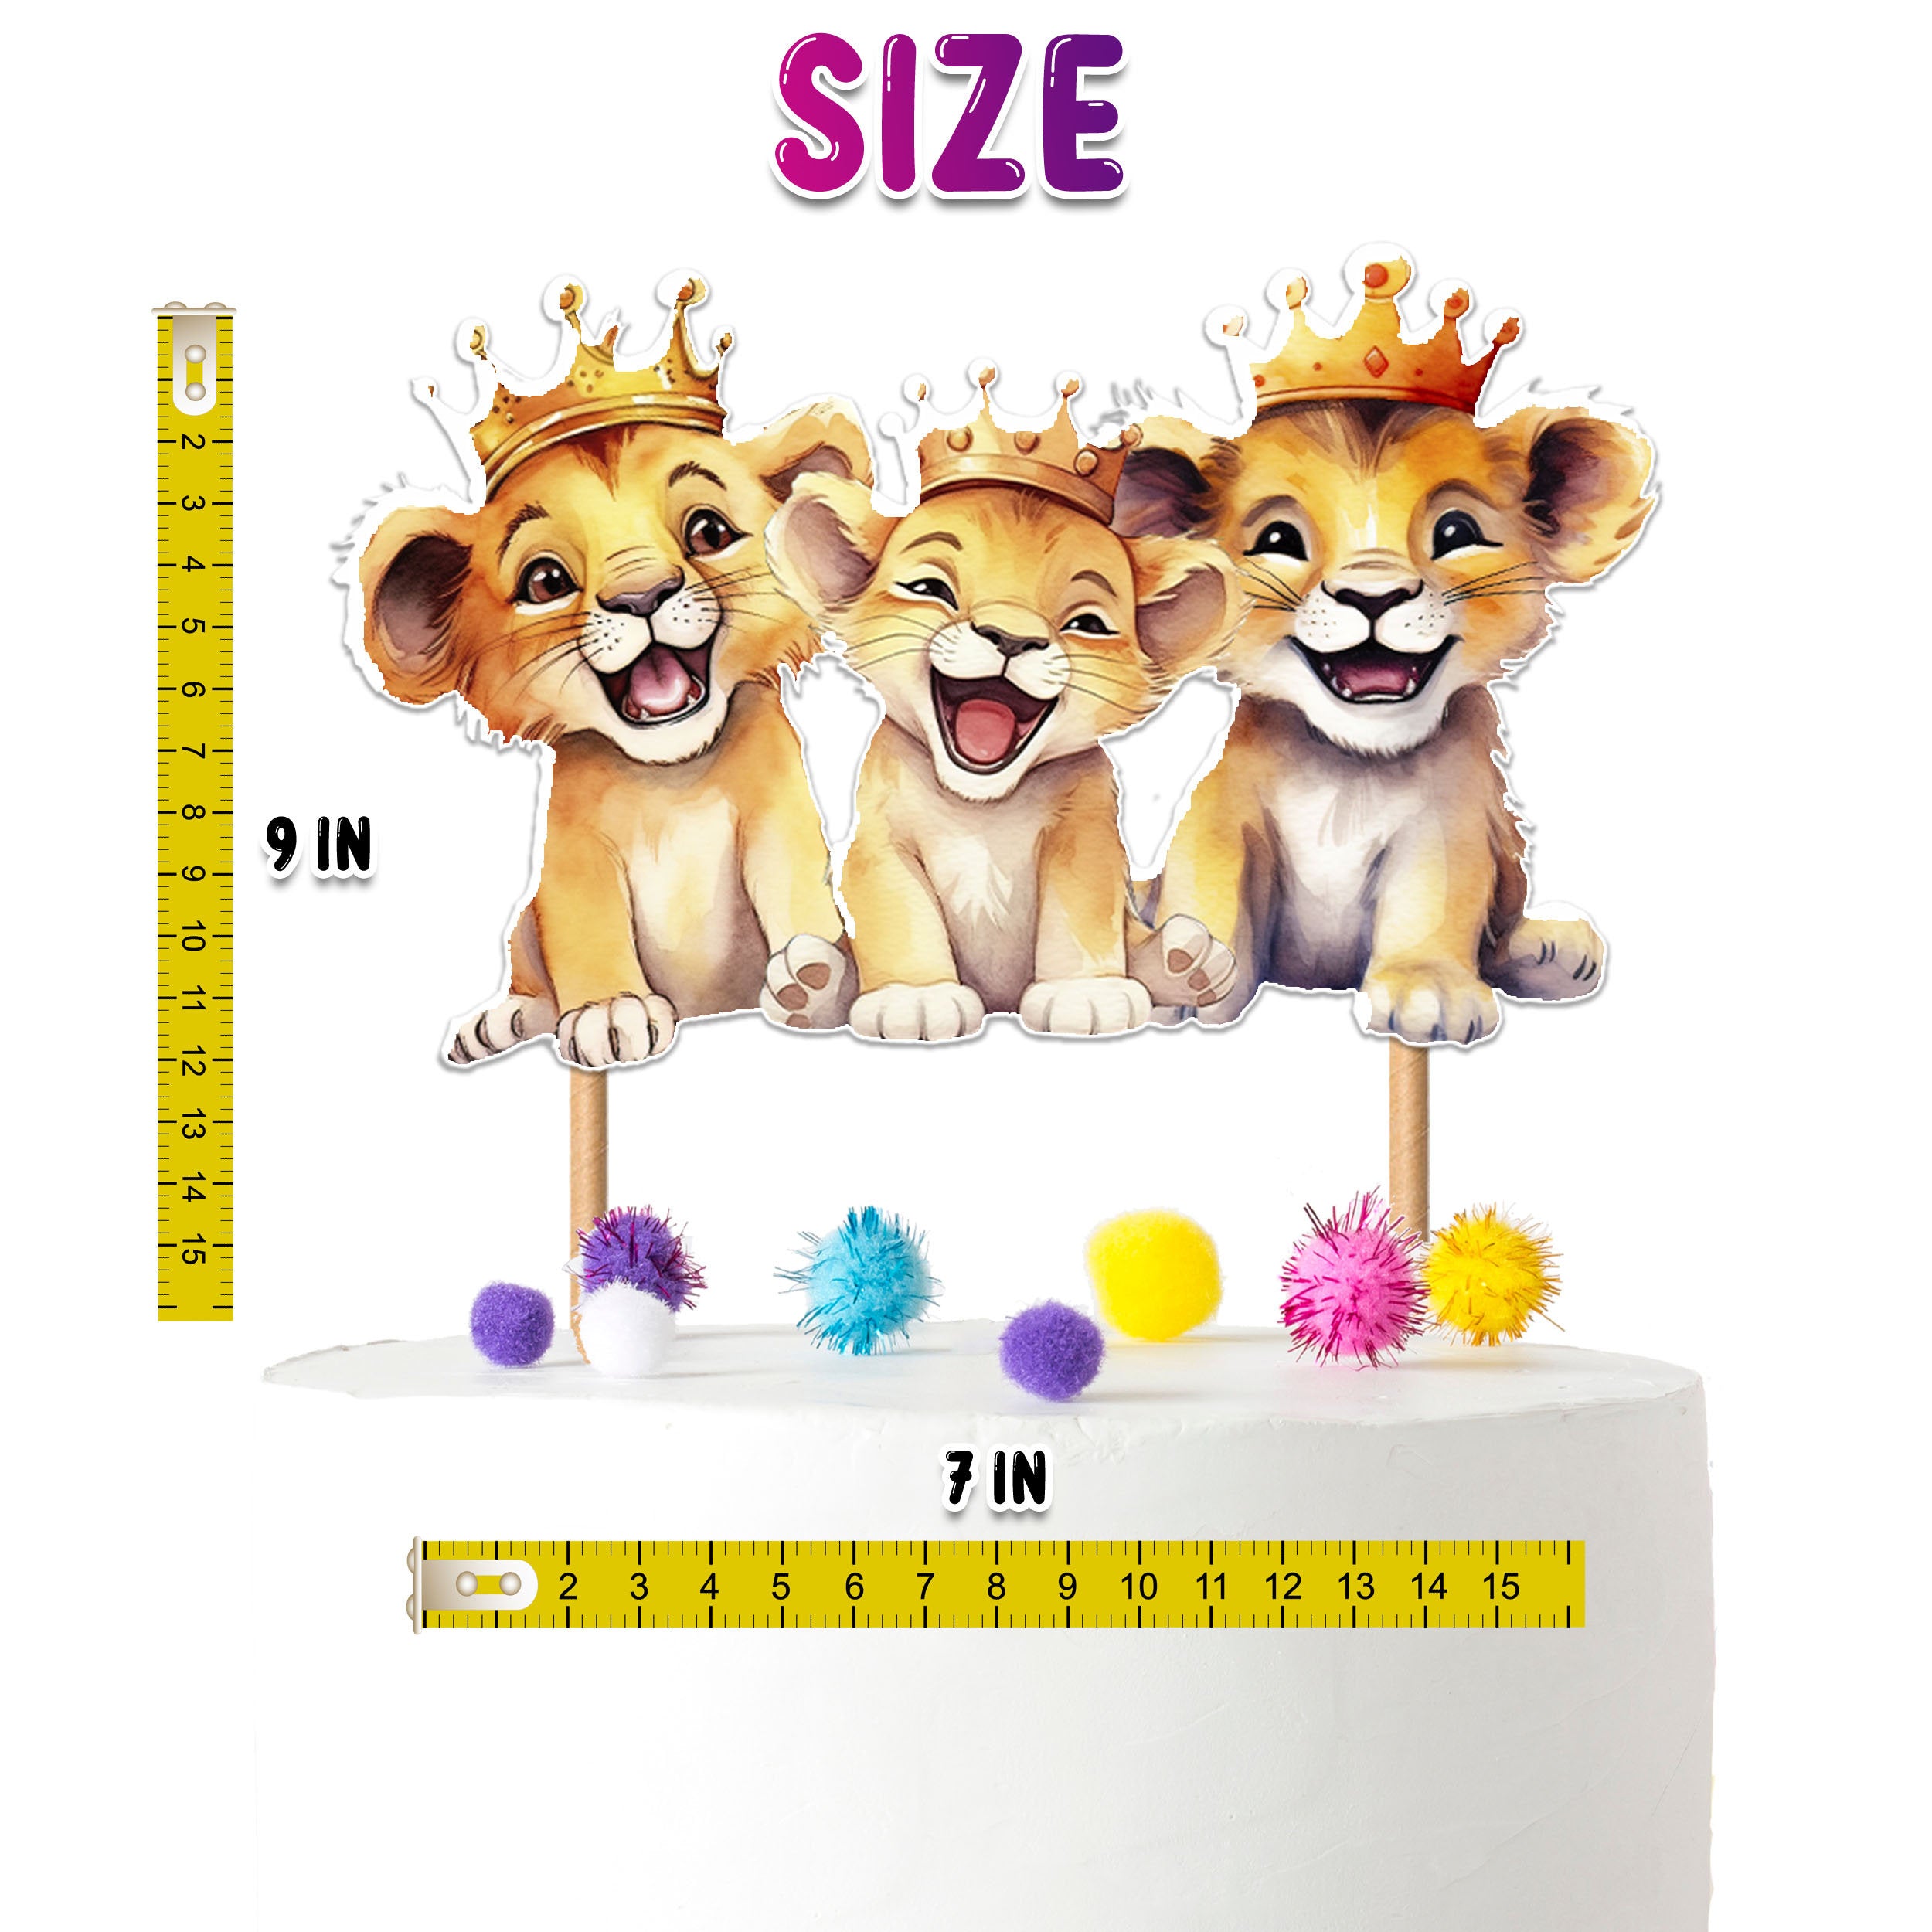 Majestic Lion Cake Topper – Perfect for Baby Showers and Birthday Celebrations